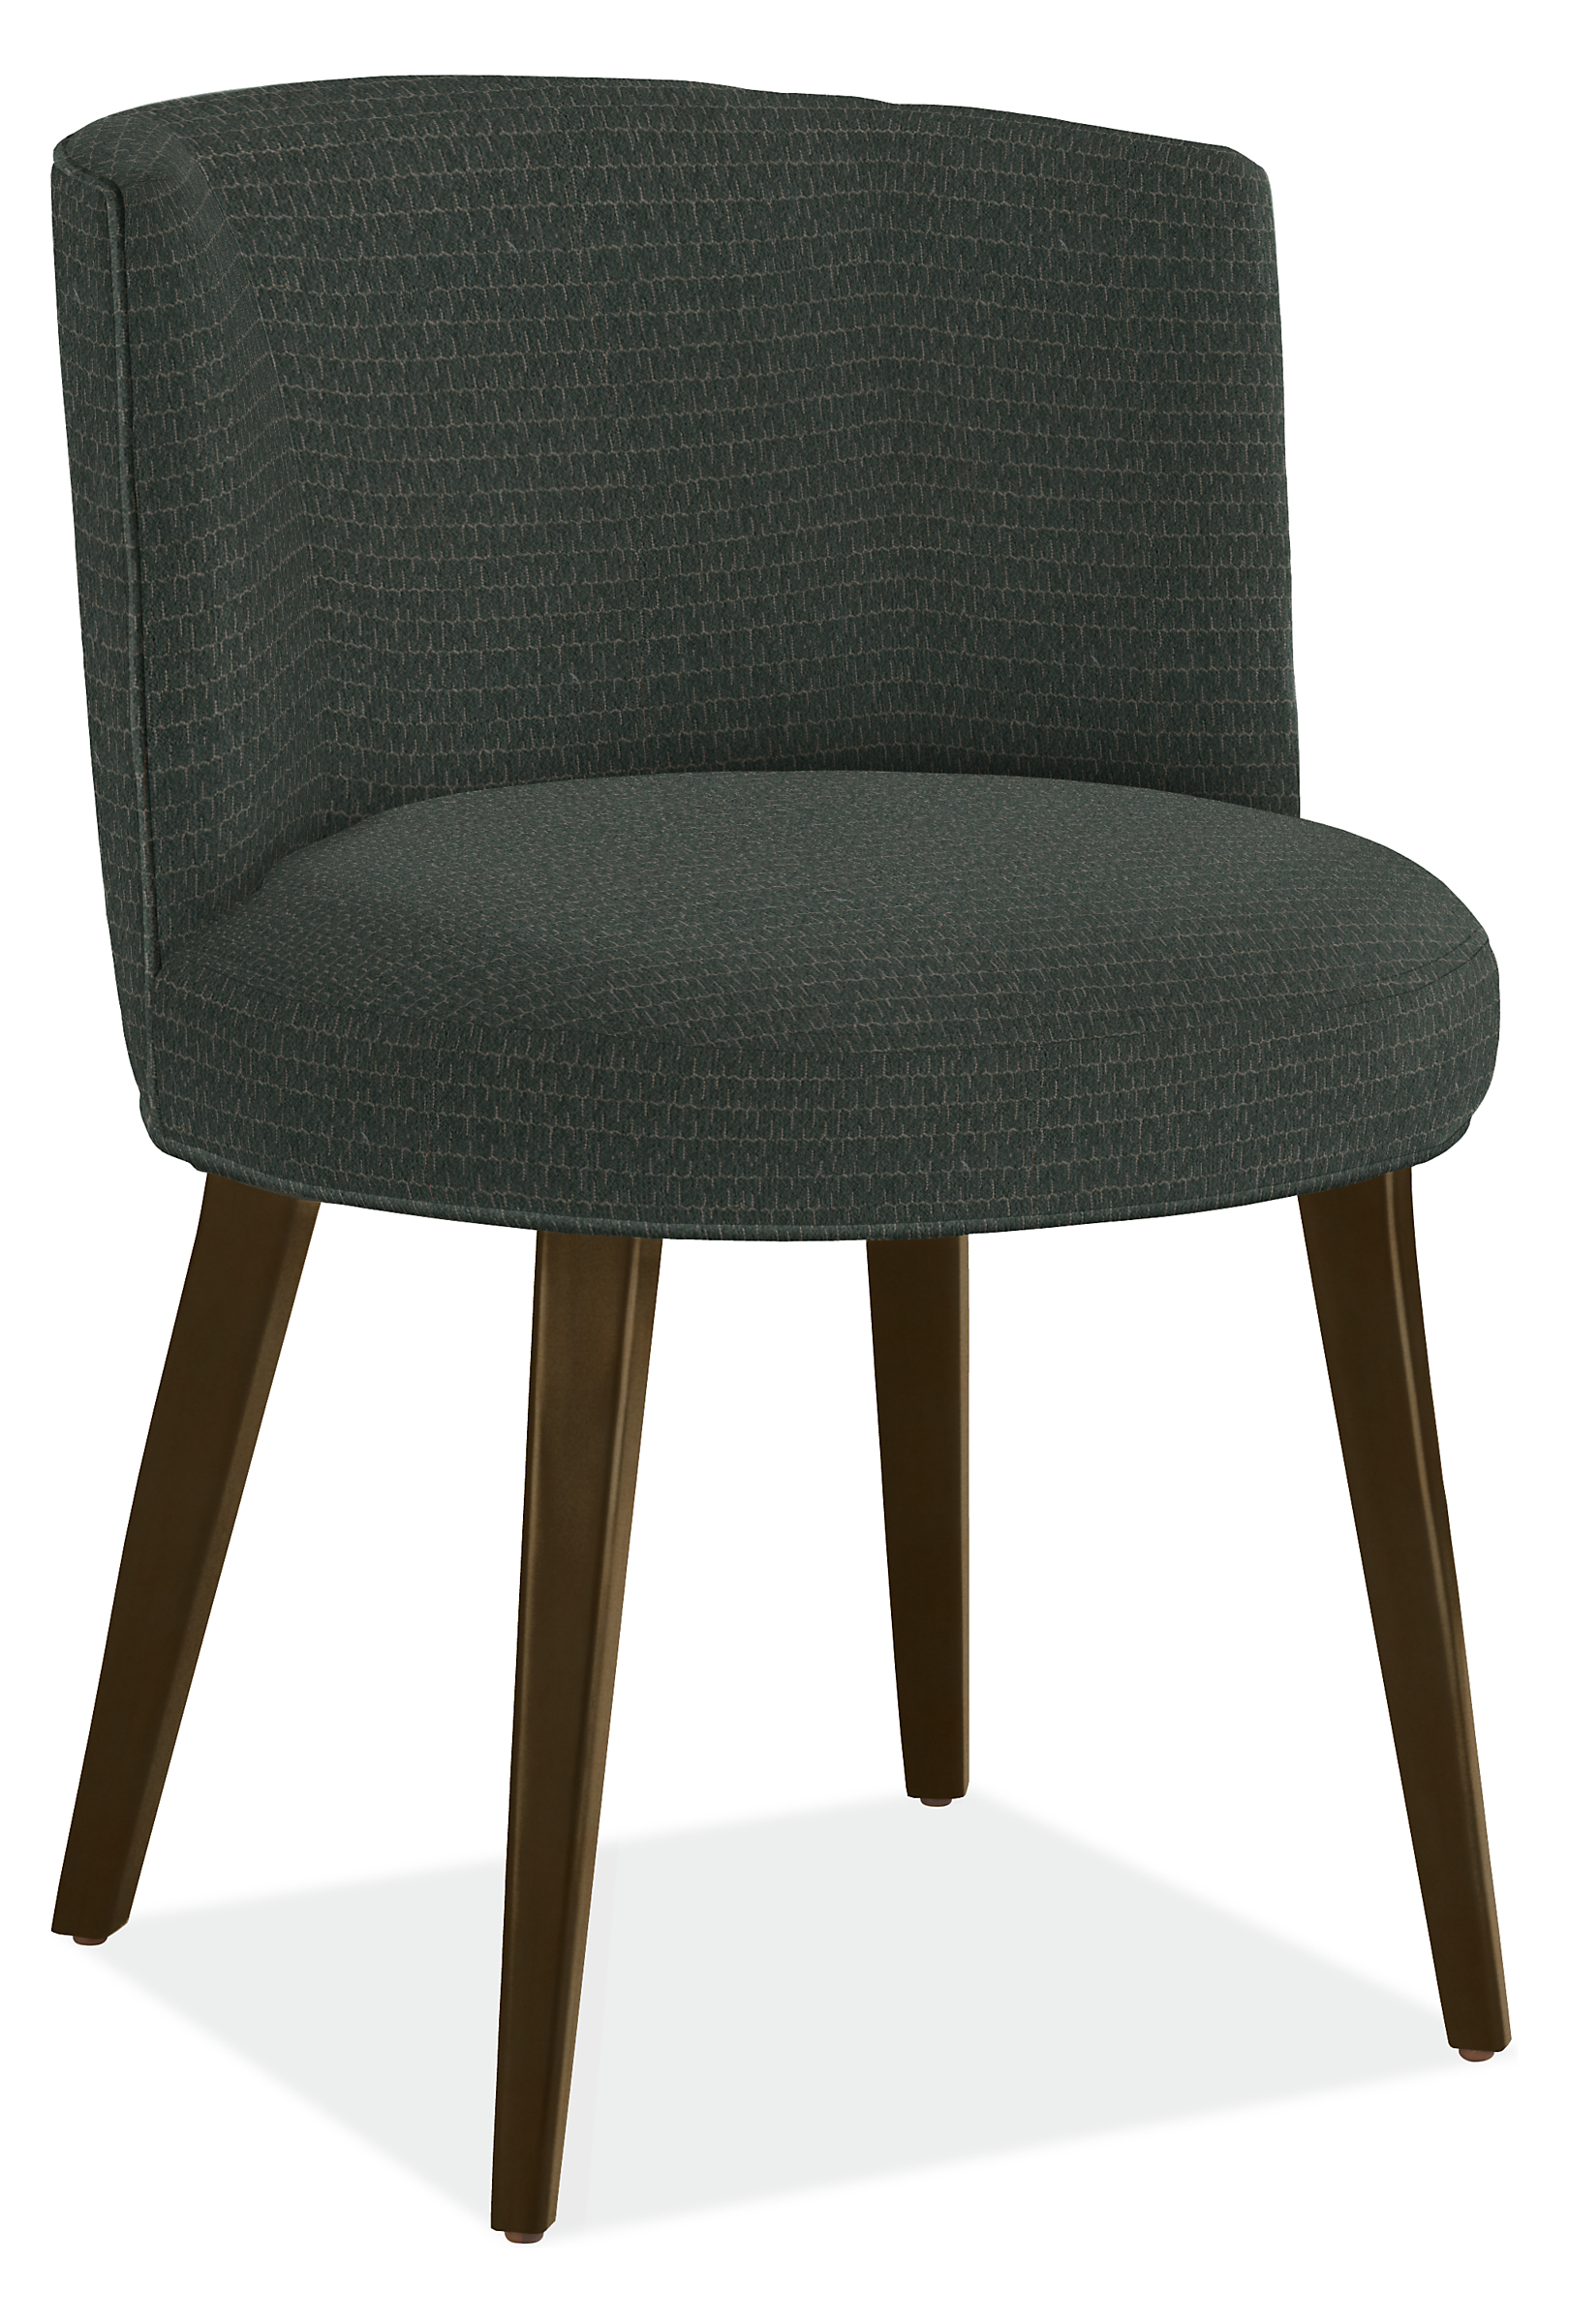 June Side Chair in Holtz Charcoal with Charcoal Legs